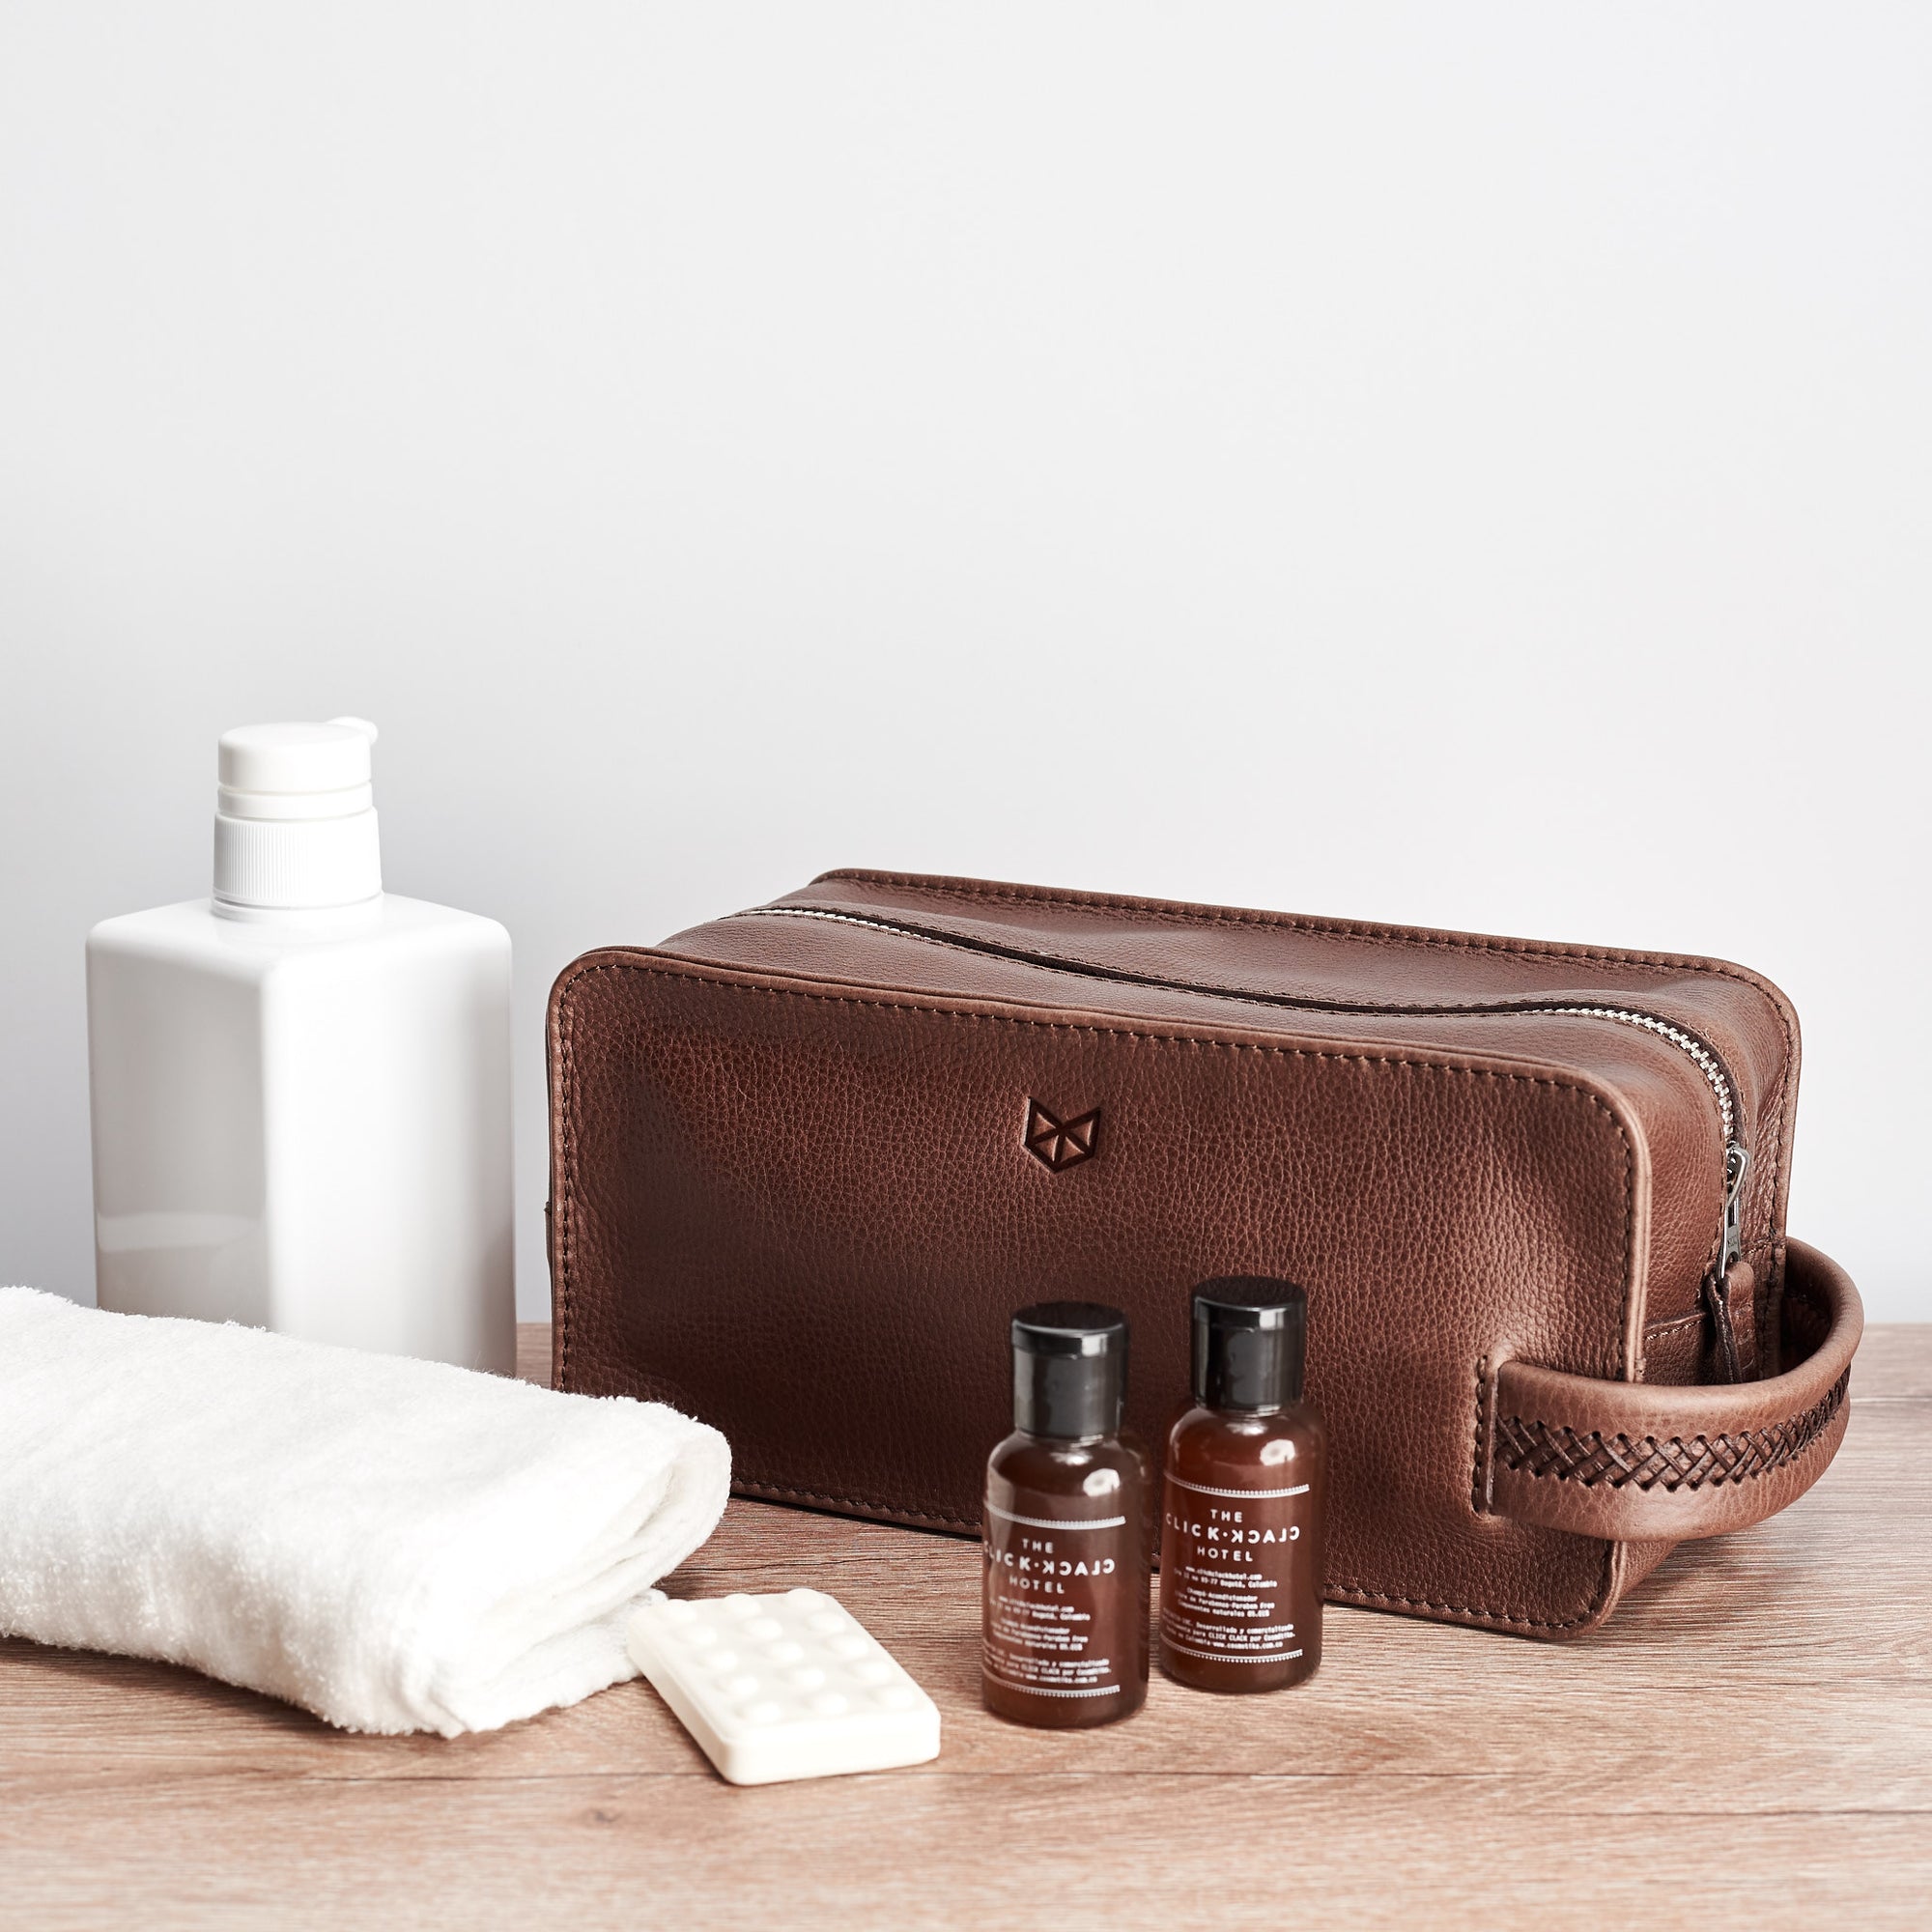 Dopp kit and toiletries. Brown leather toiletry, shaving bag with hand stitched handle